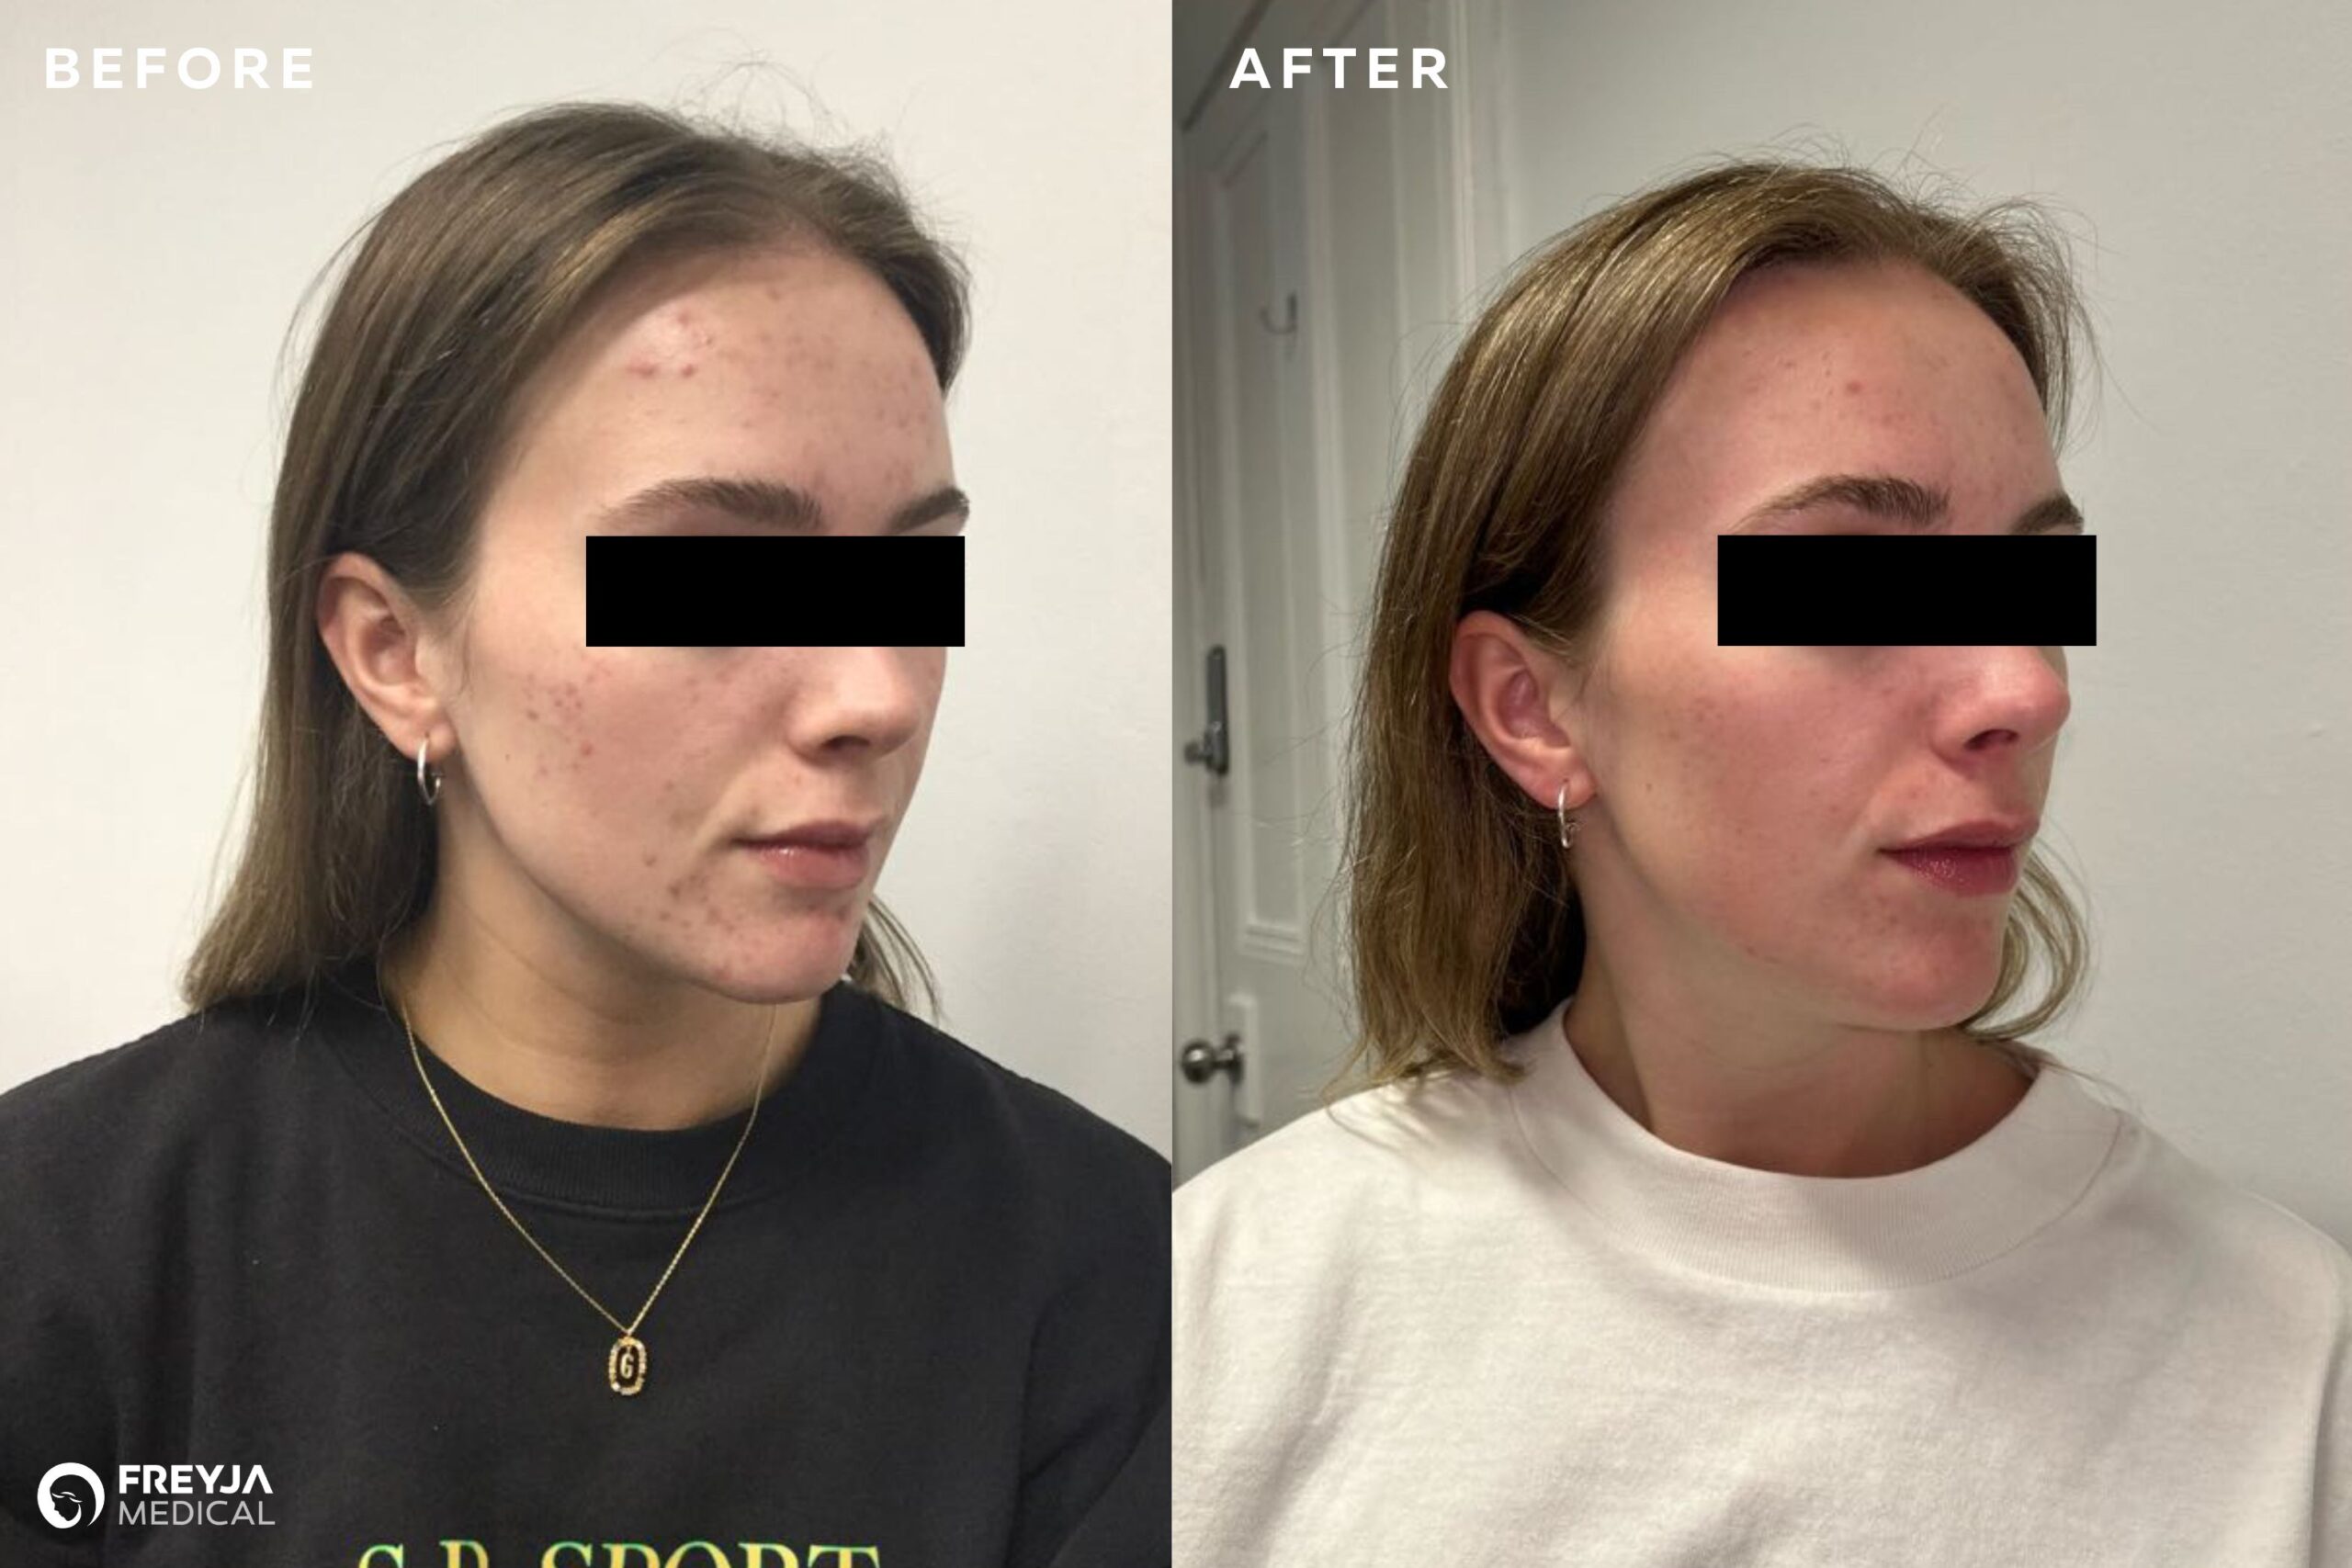 Skin Peels at Freyja Medical. Results. Before and After Images